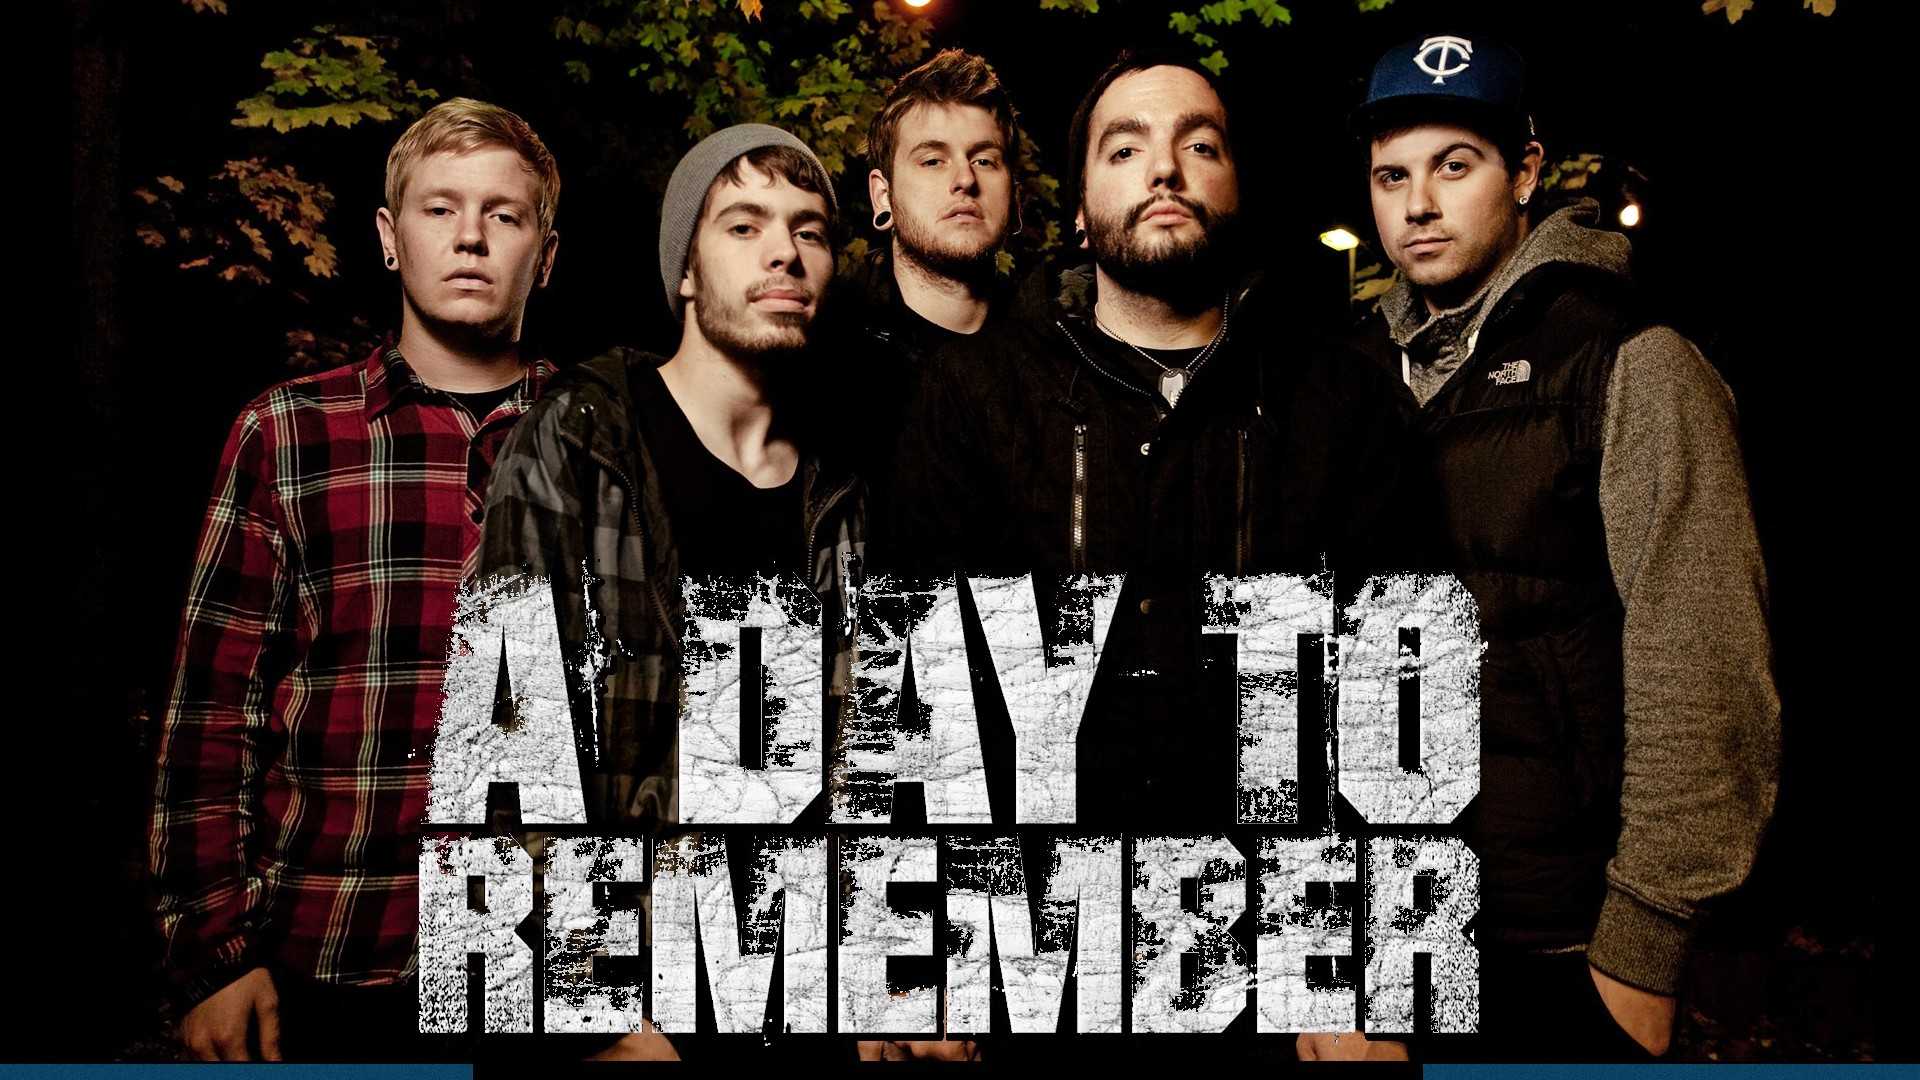 Wildcat Tales A Day to Remember’s House Party Tour Review